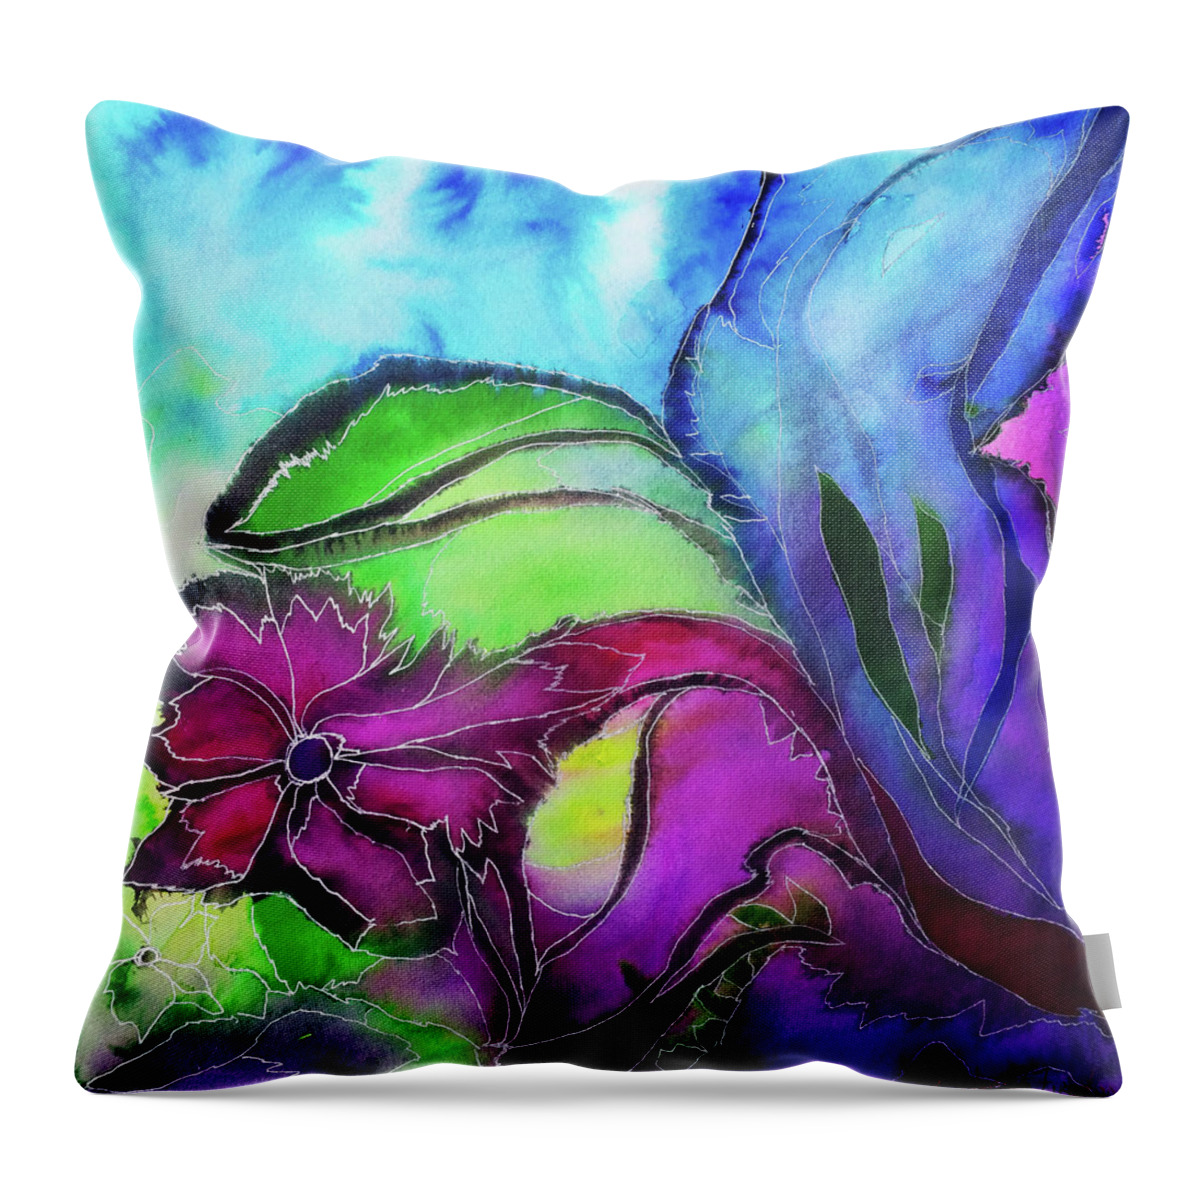 Blue Throw Pillow featuring the painting Pink Flower by Melinda Firestone-White